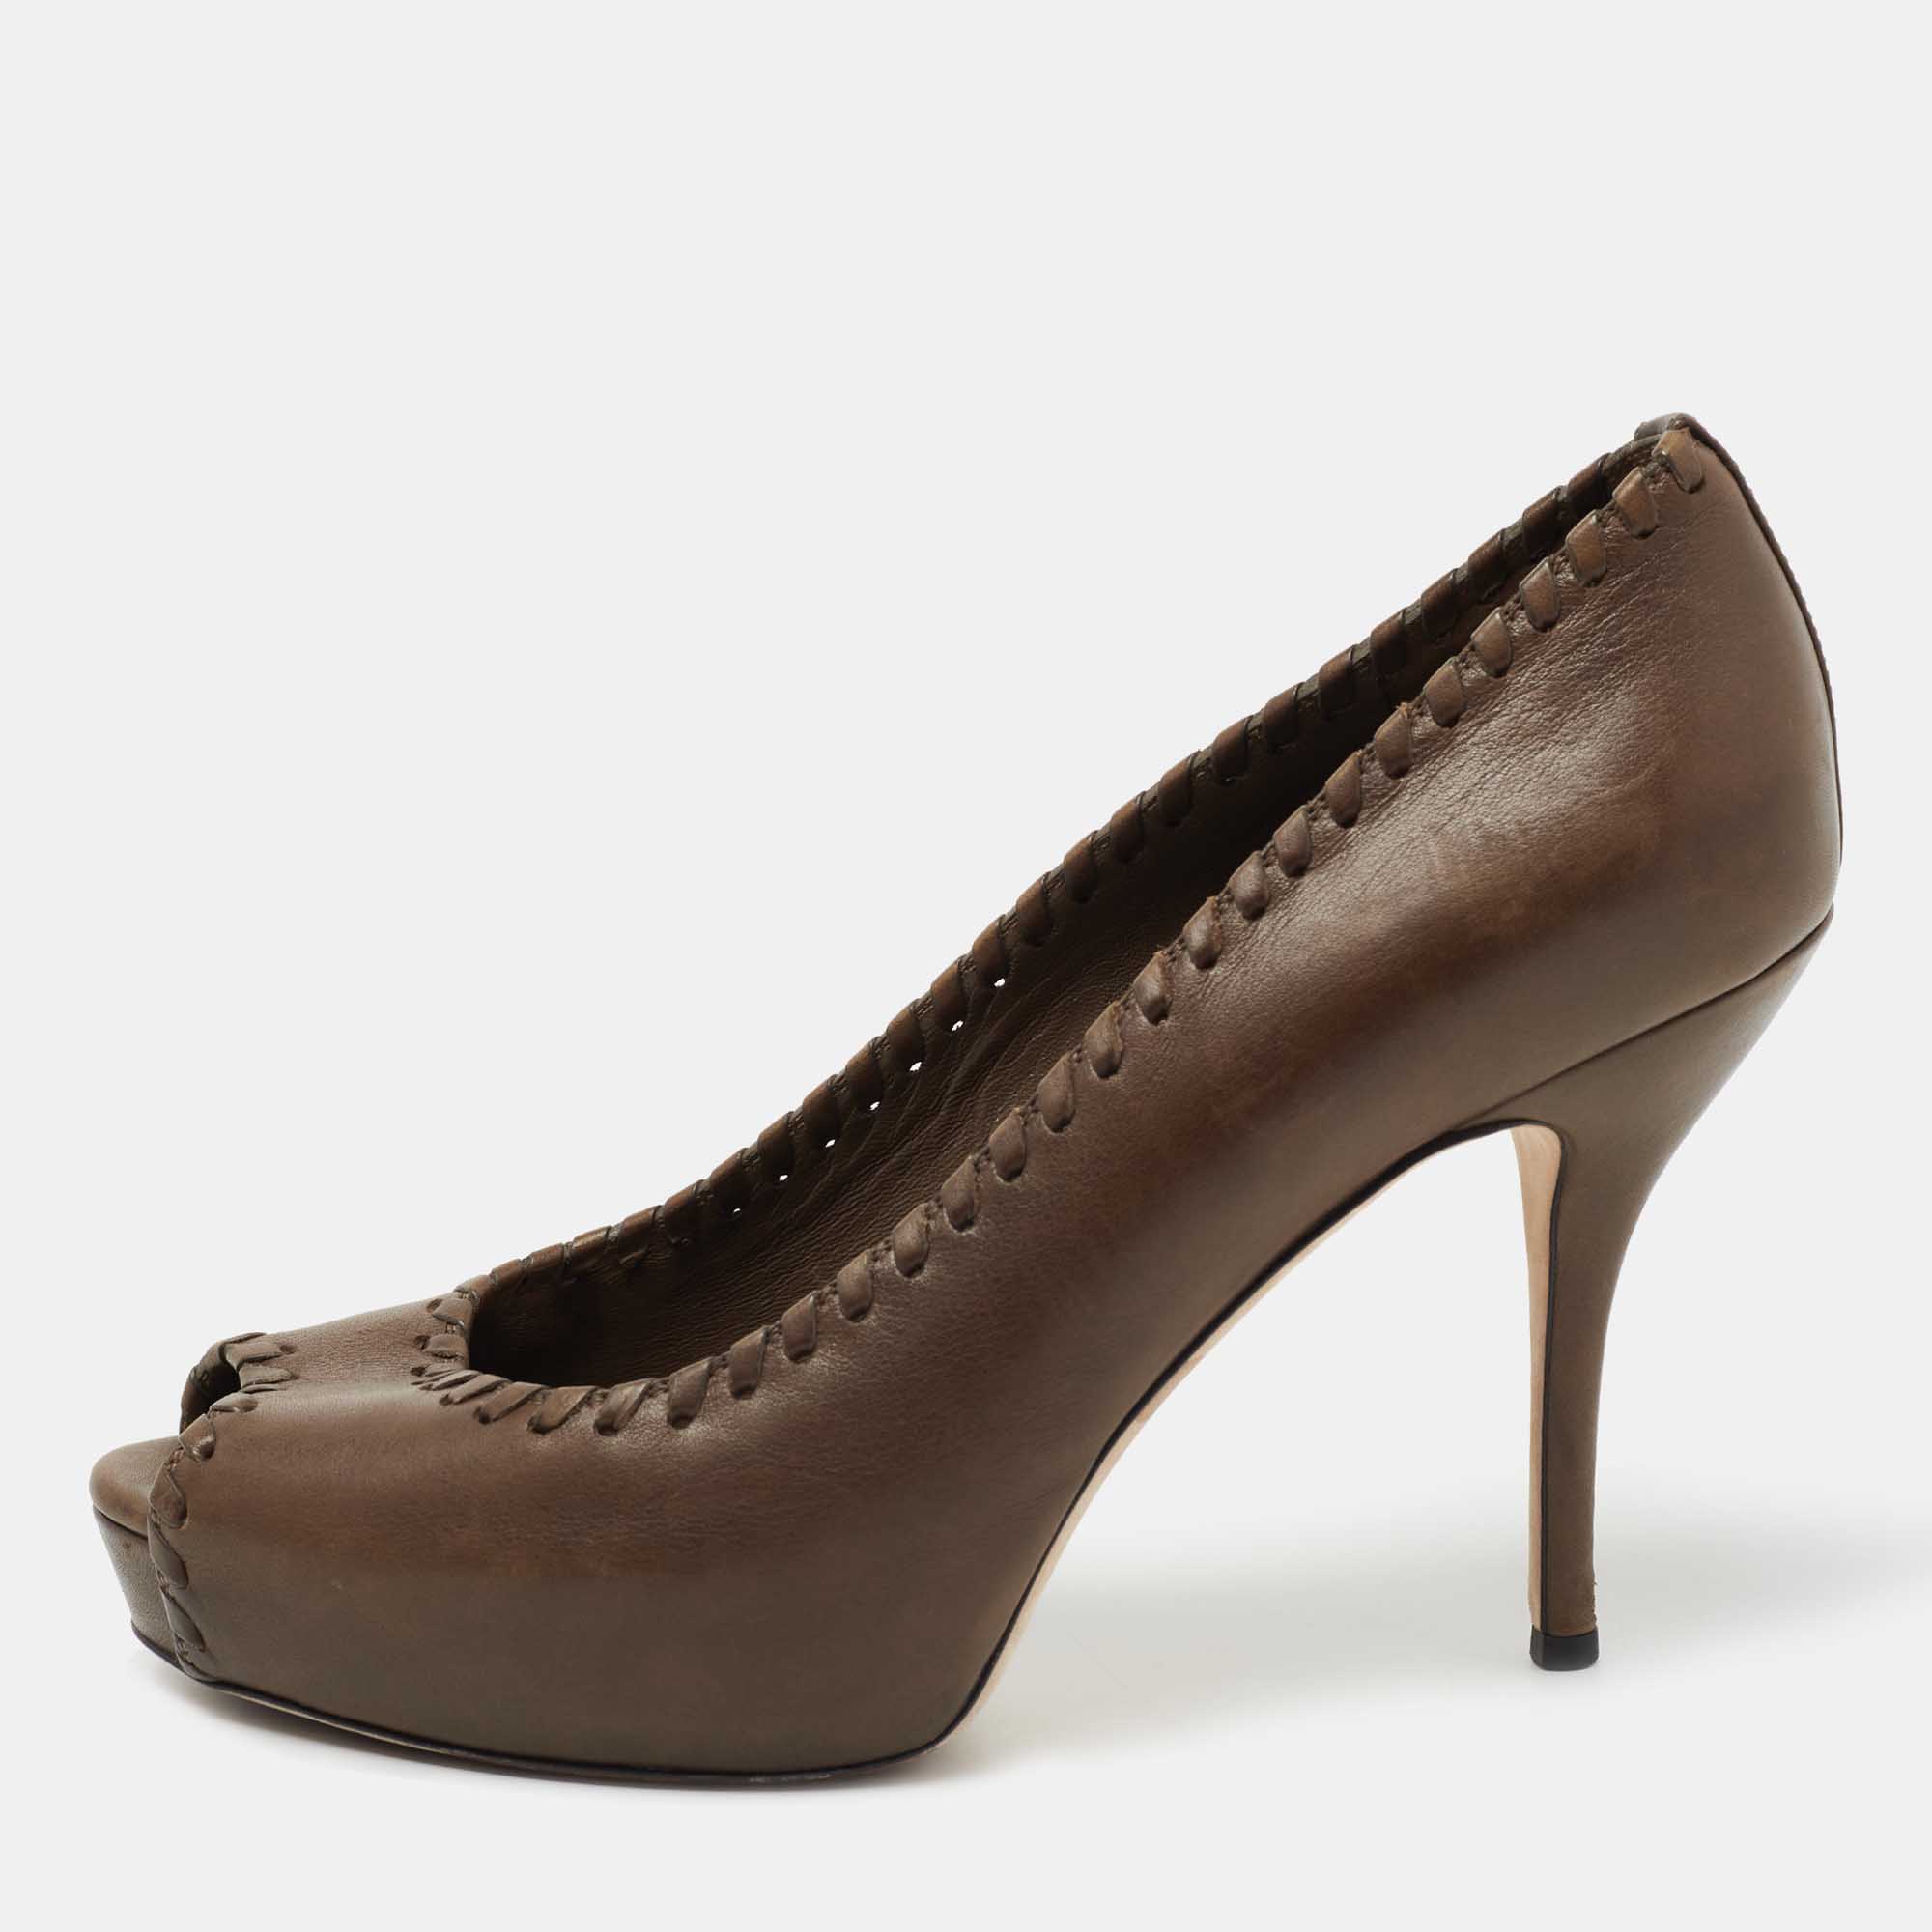 Gucci brown leather whipstitch peep toe platform pumps size 38